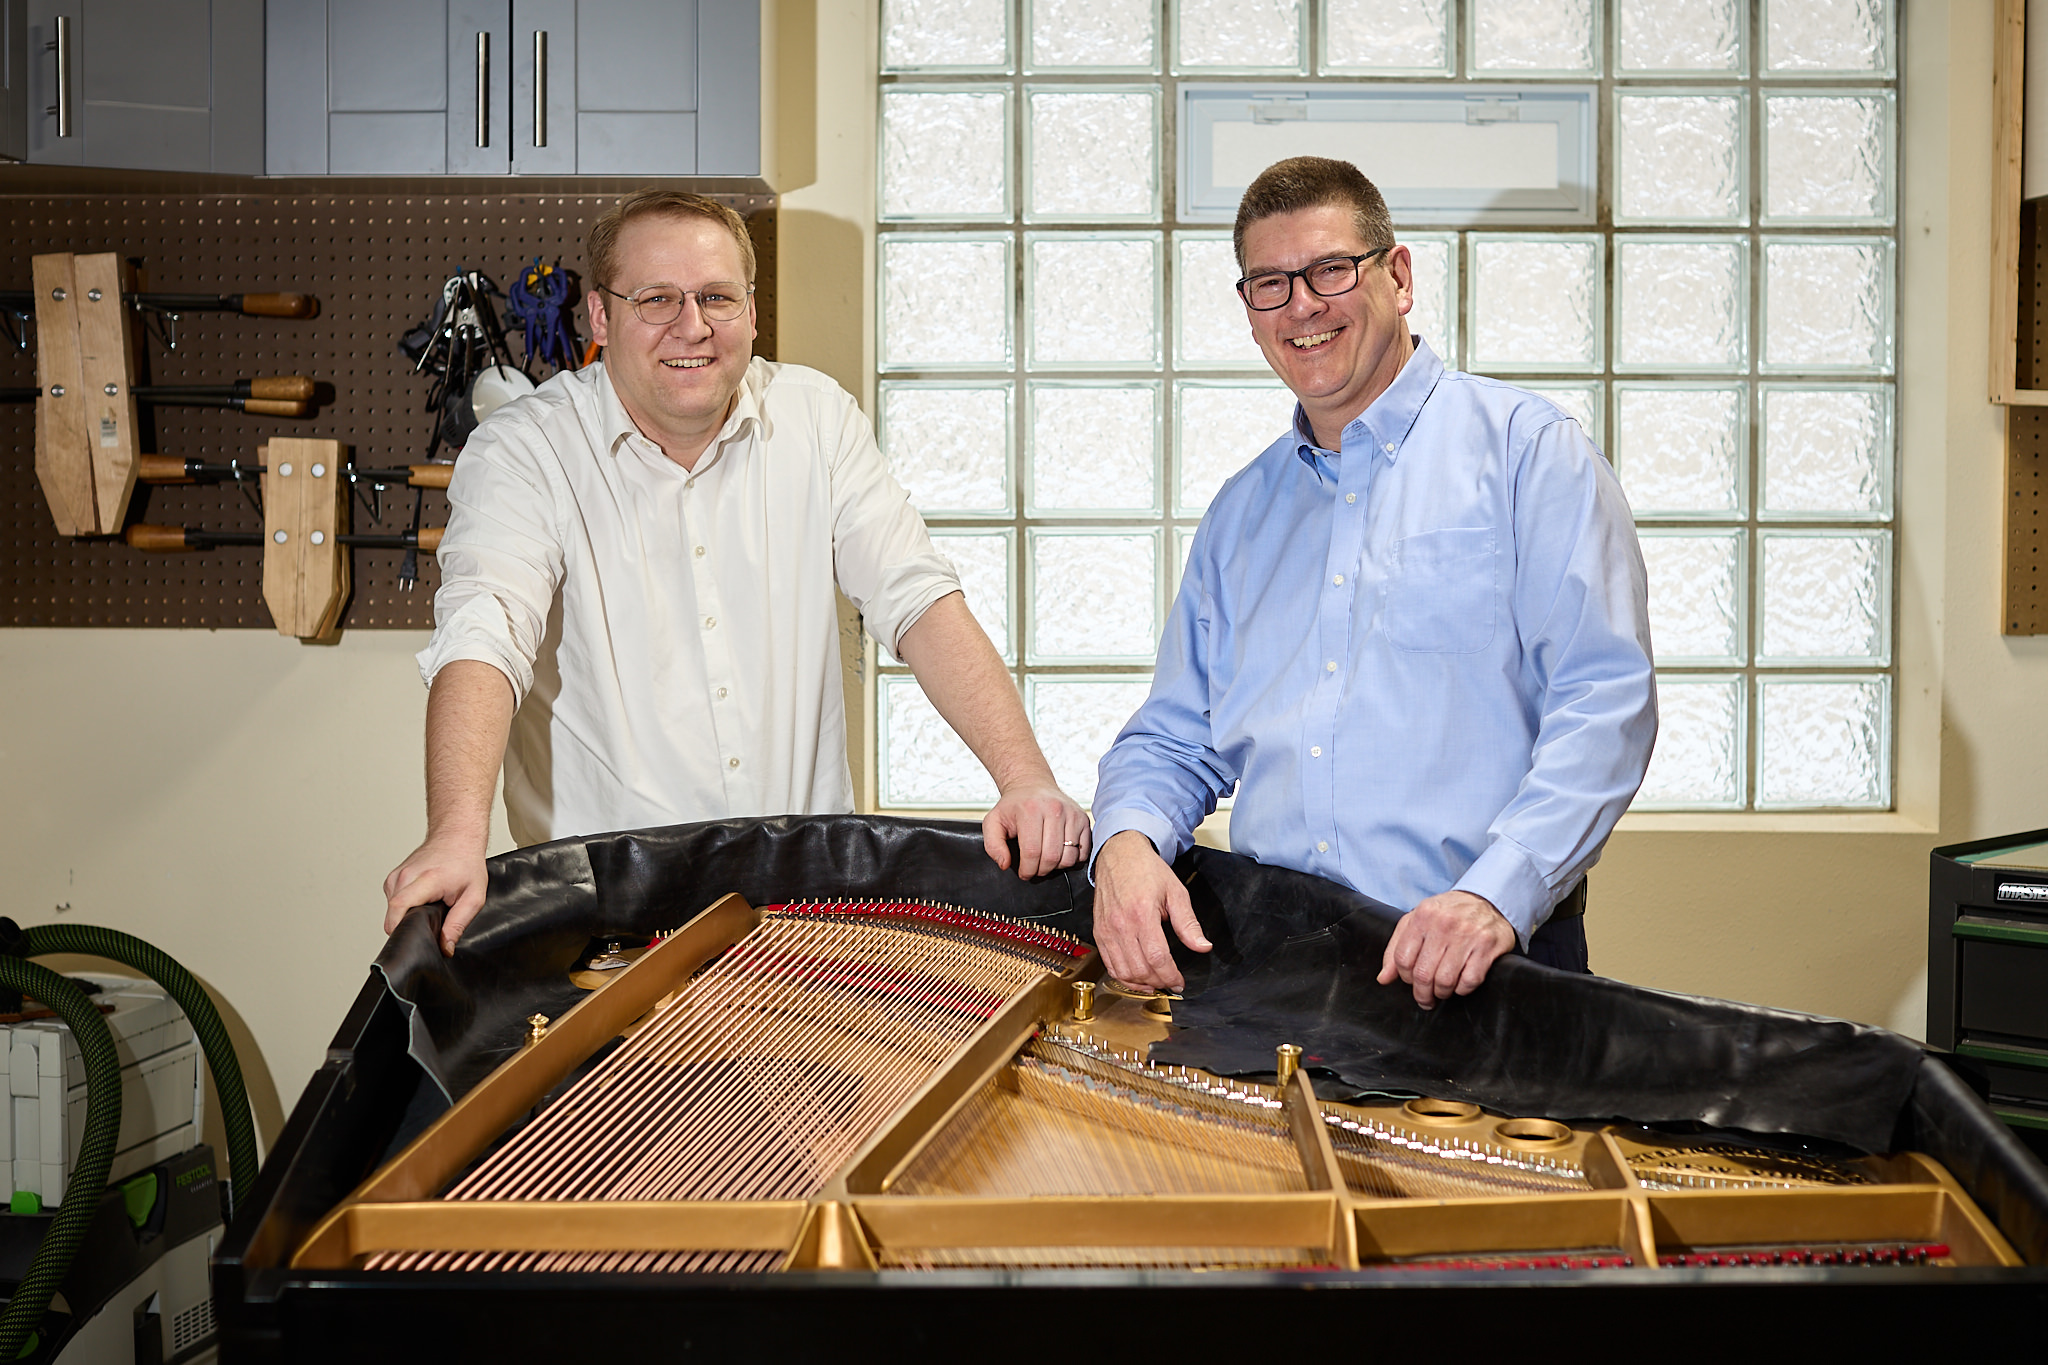 Piano techs Dave & Tom in the workshop